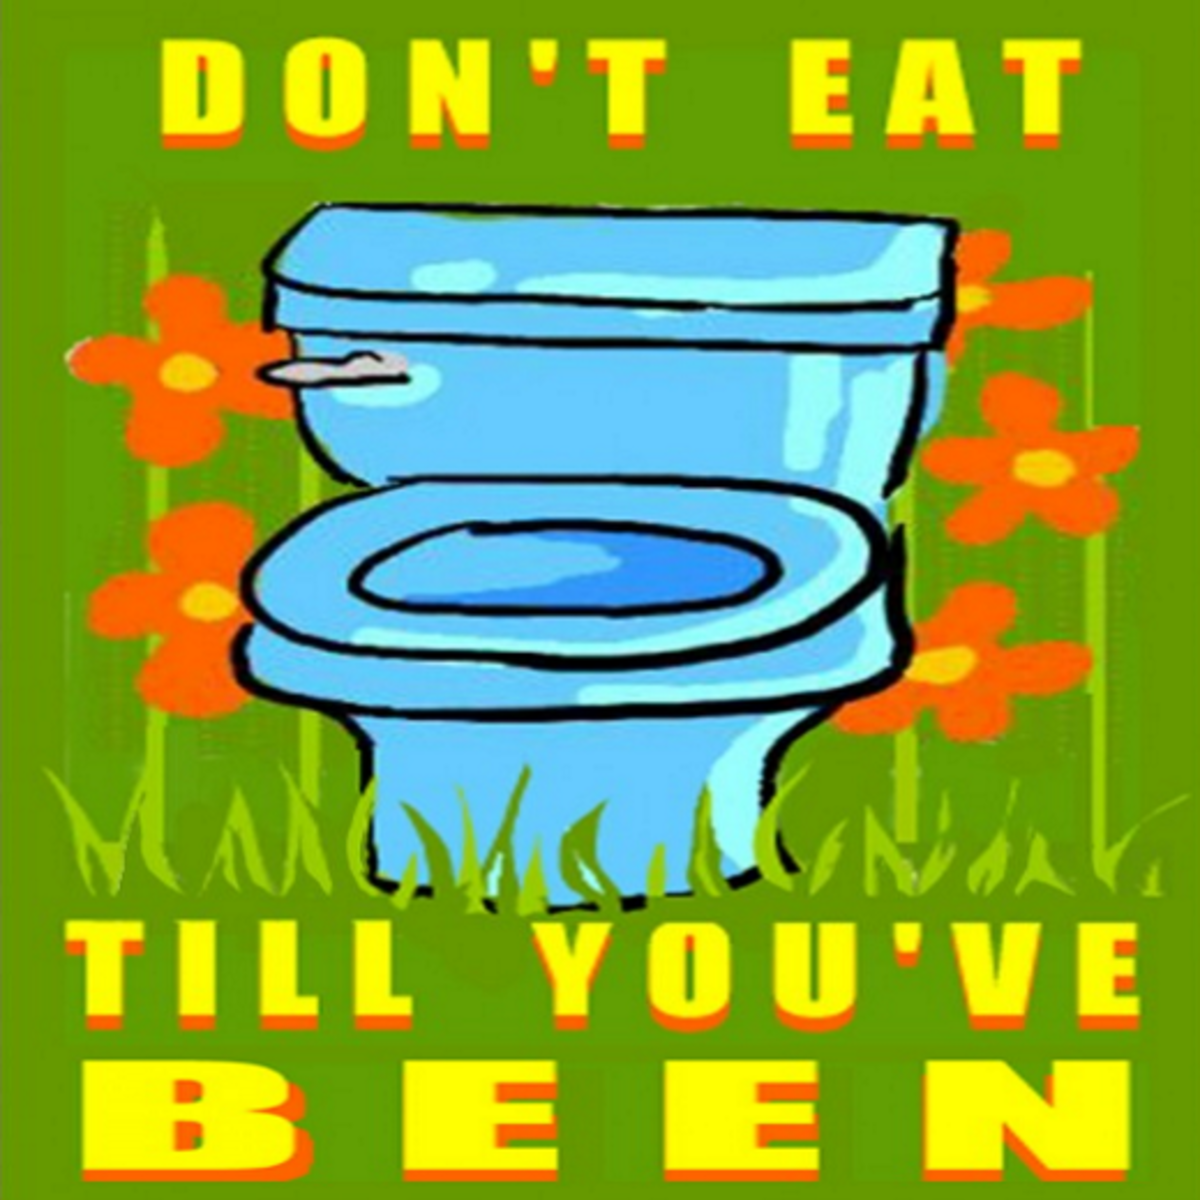 The first rule in weight loss: "Don't eat until you've had a bowel movement" is easy to get used to.